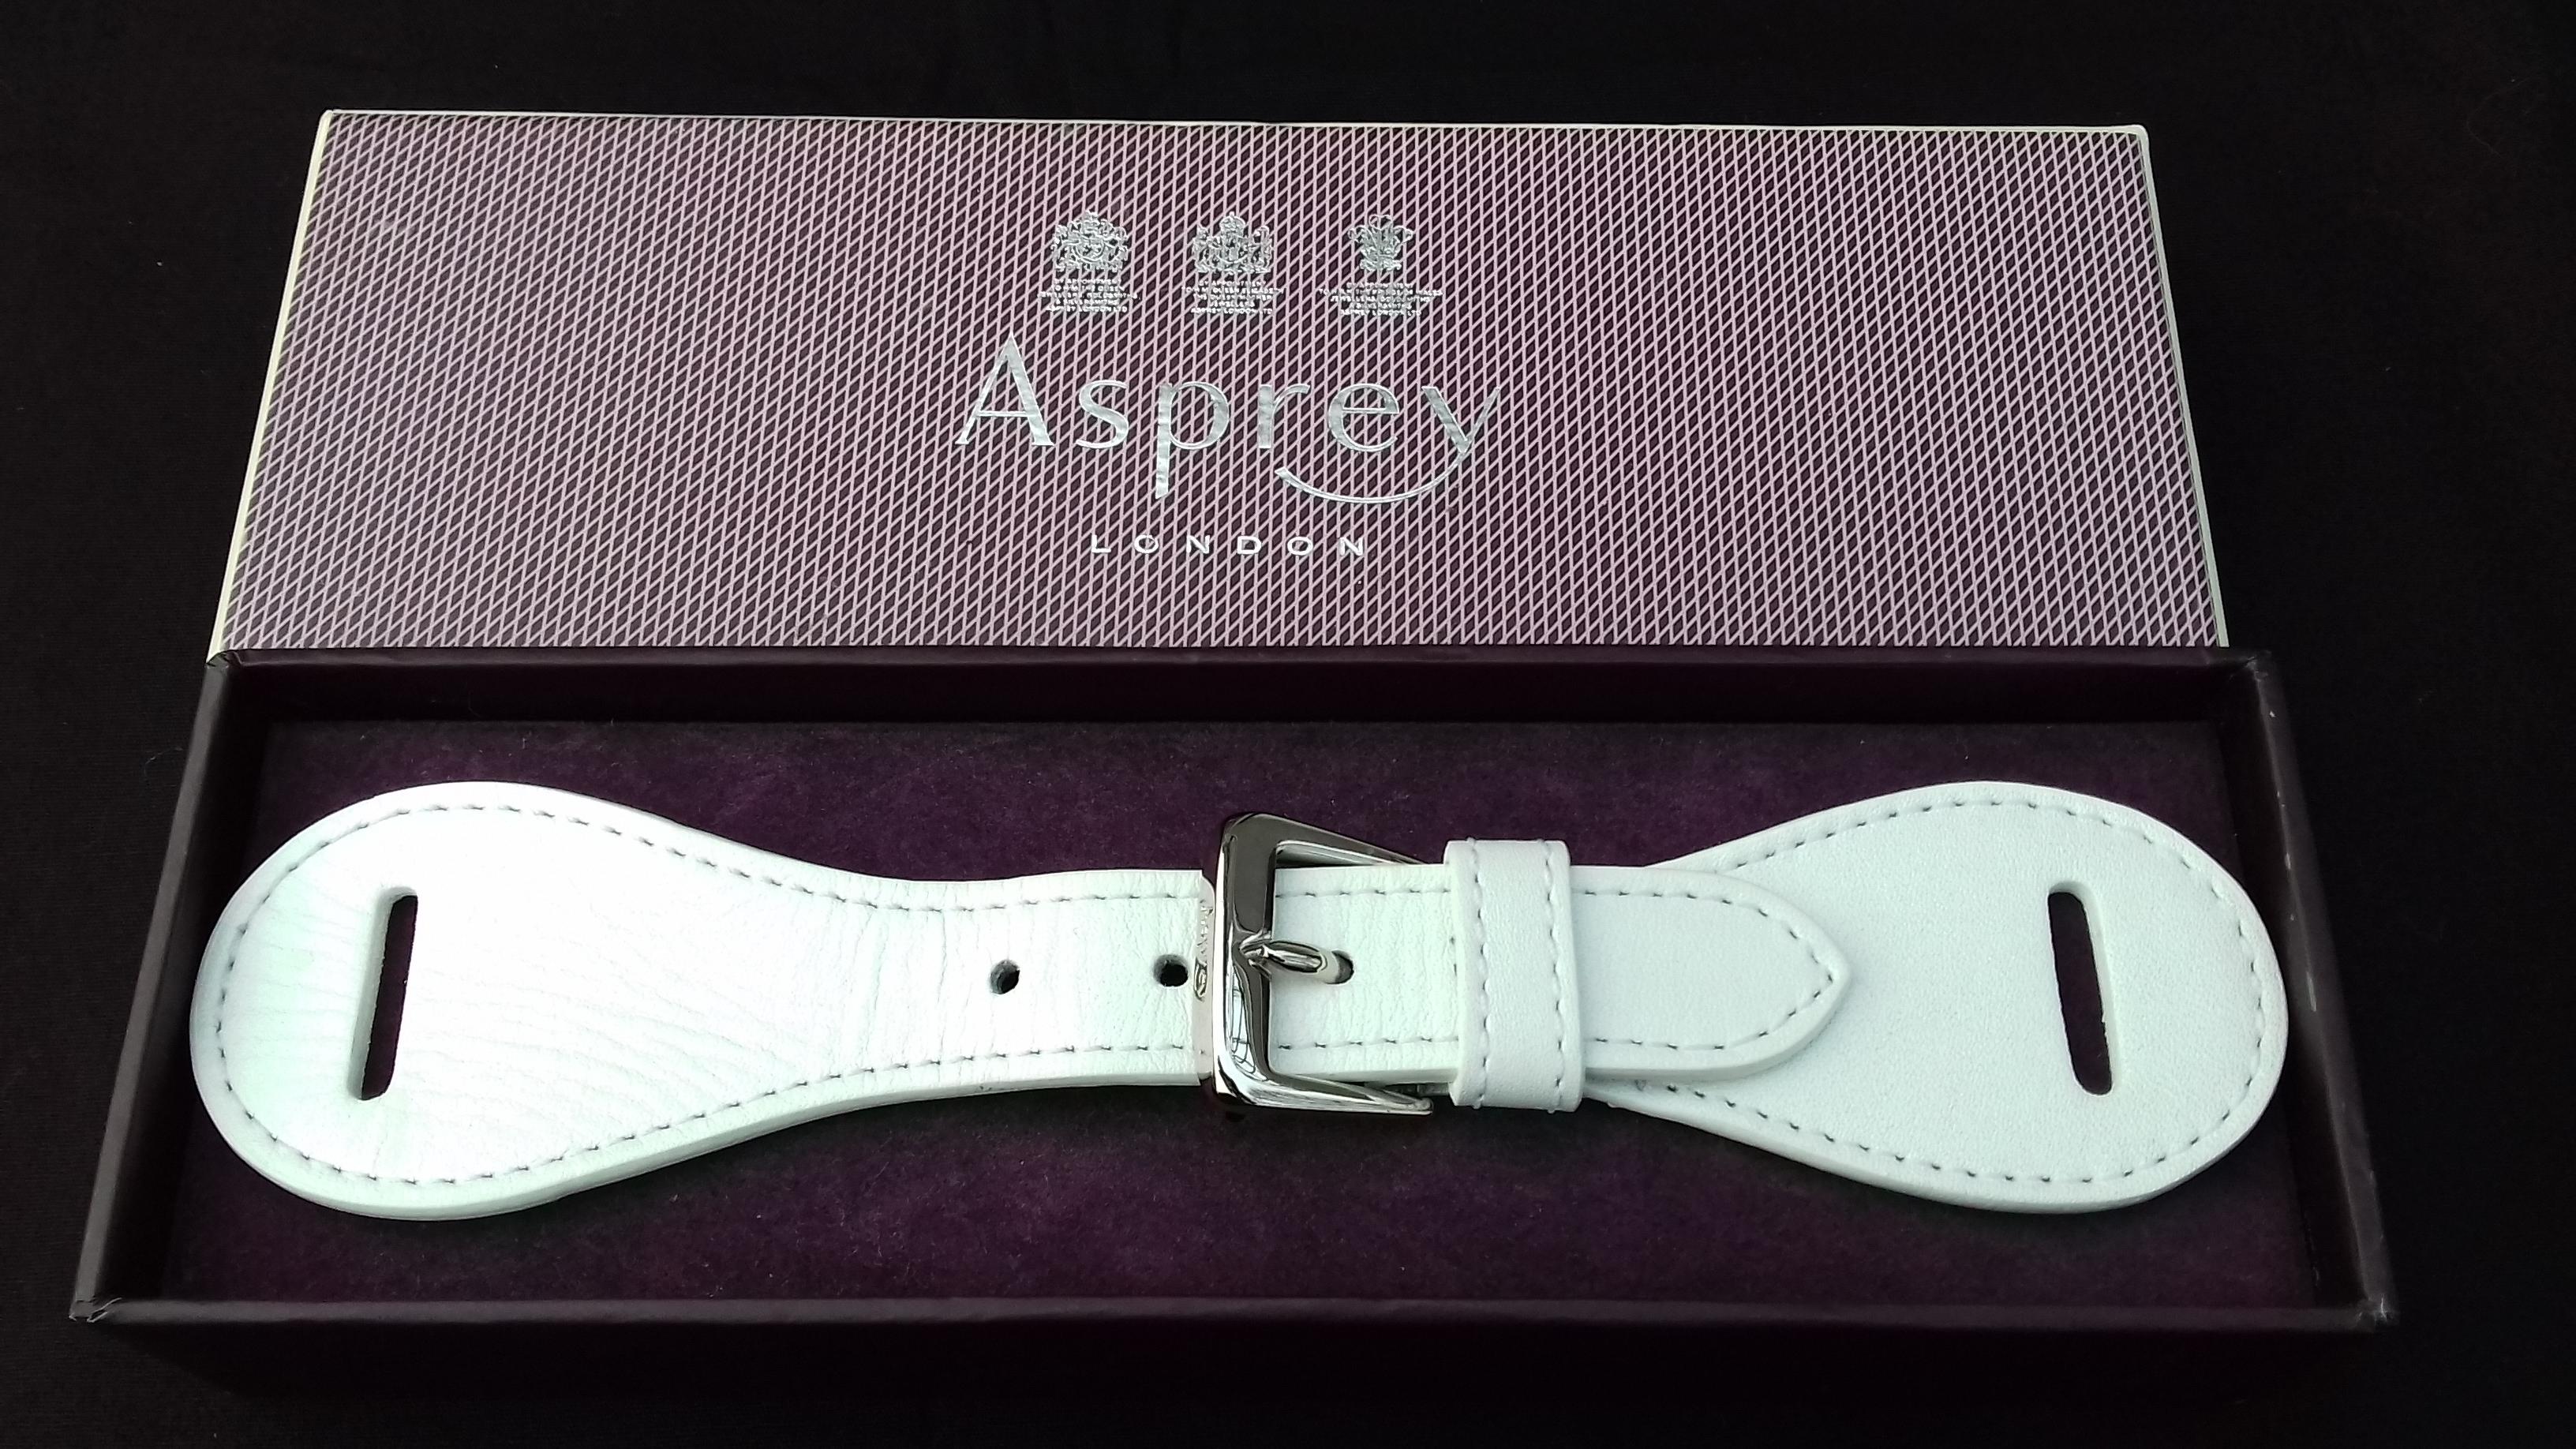 Beautiful and so practical Authentic Asprey Belt Buckle

Made in France

Made of smooth white Leather and silver-tone Hardware

Perfect color for Spring Summer

